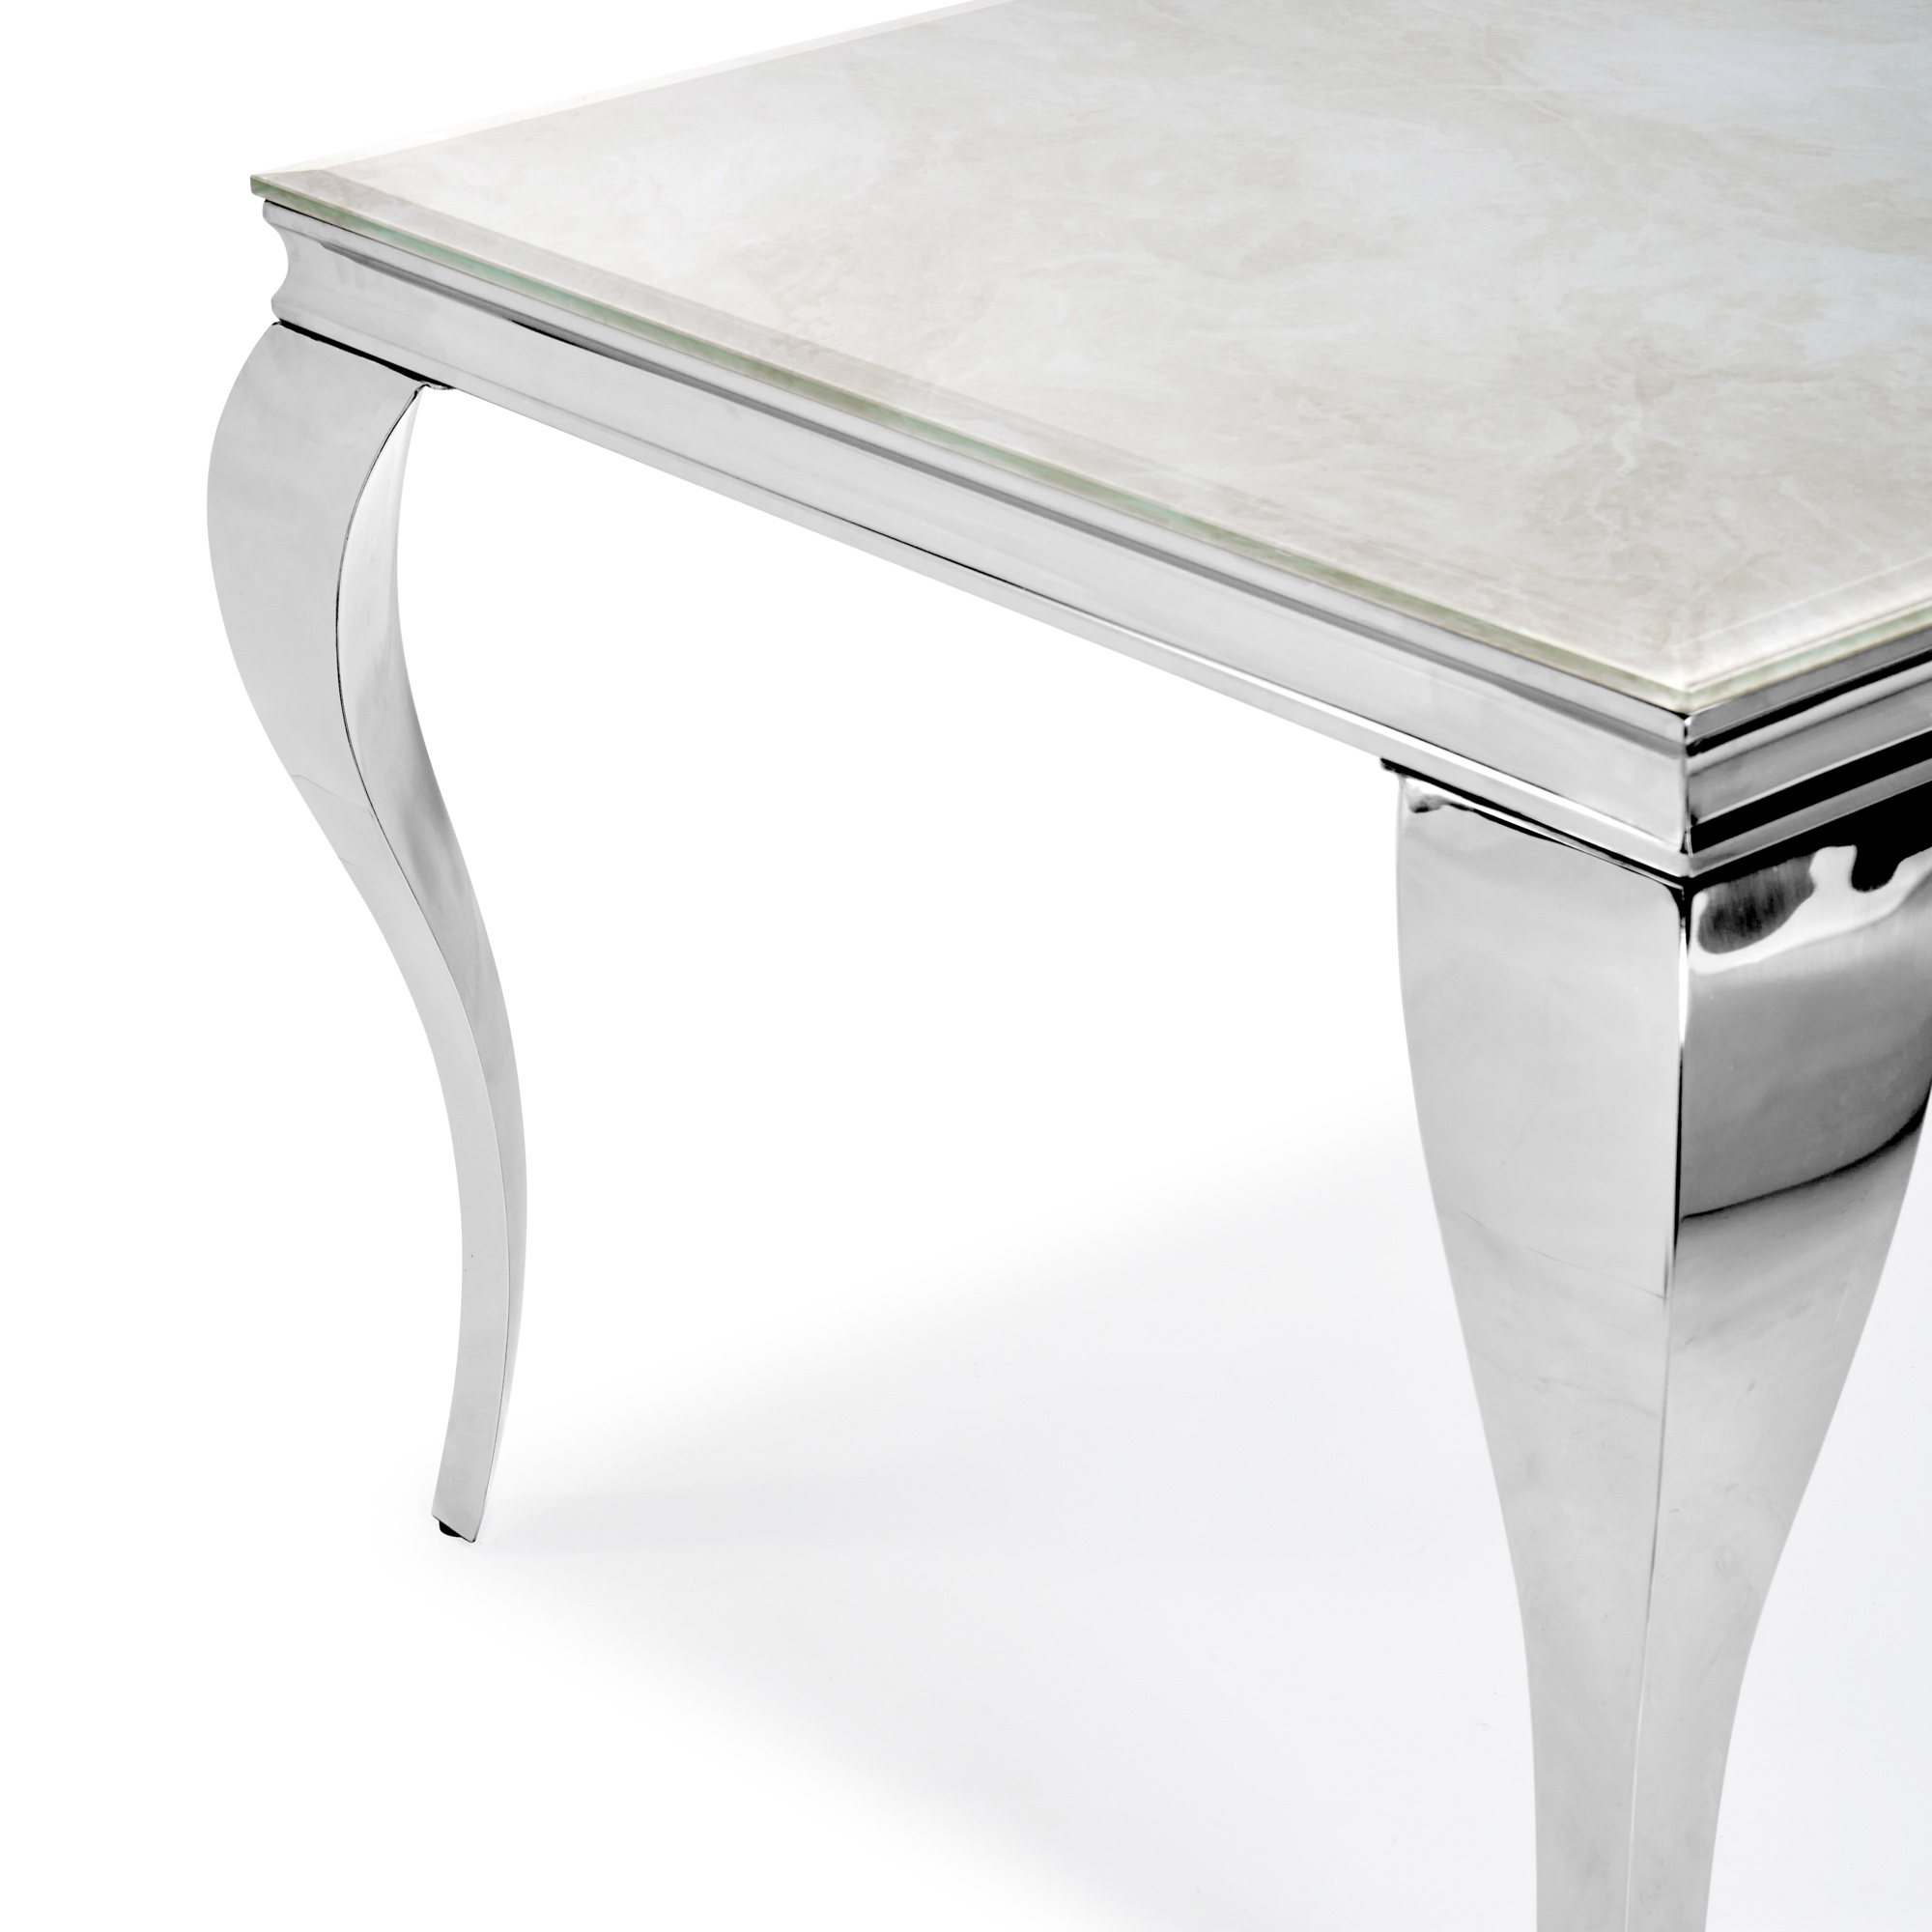 1.6m Louis Polished Stainless Steel Dining Table with Cream Marble Effect Tempered Glass